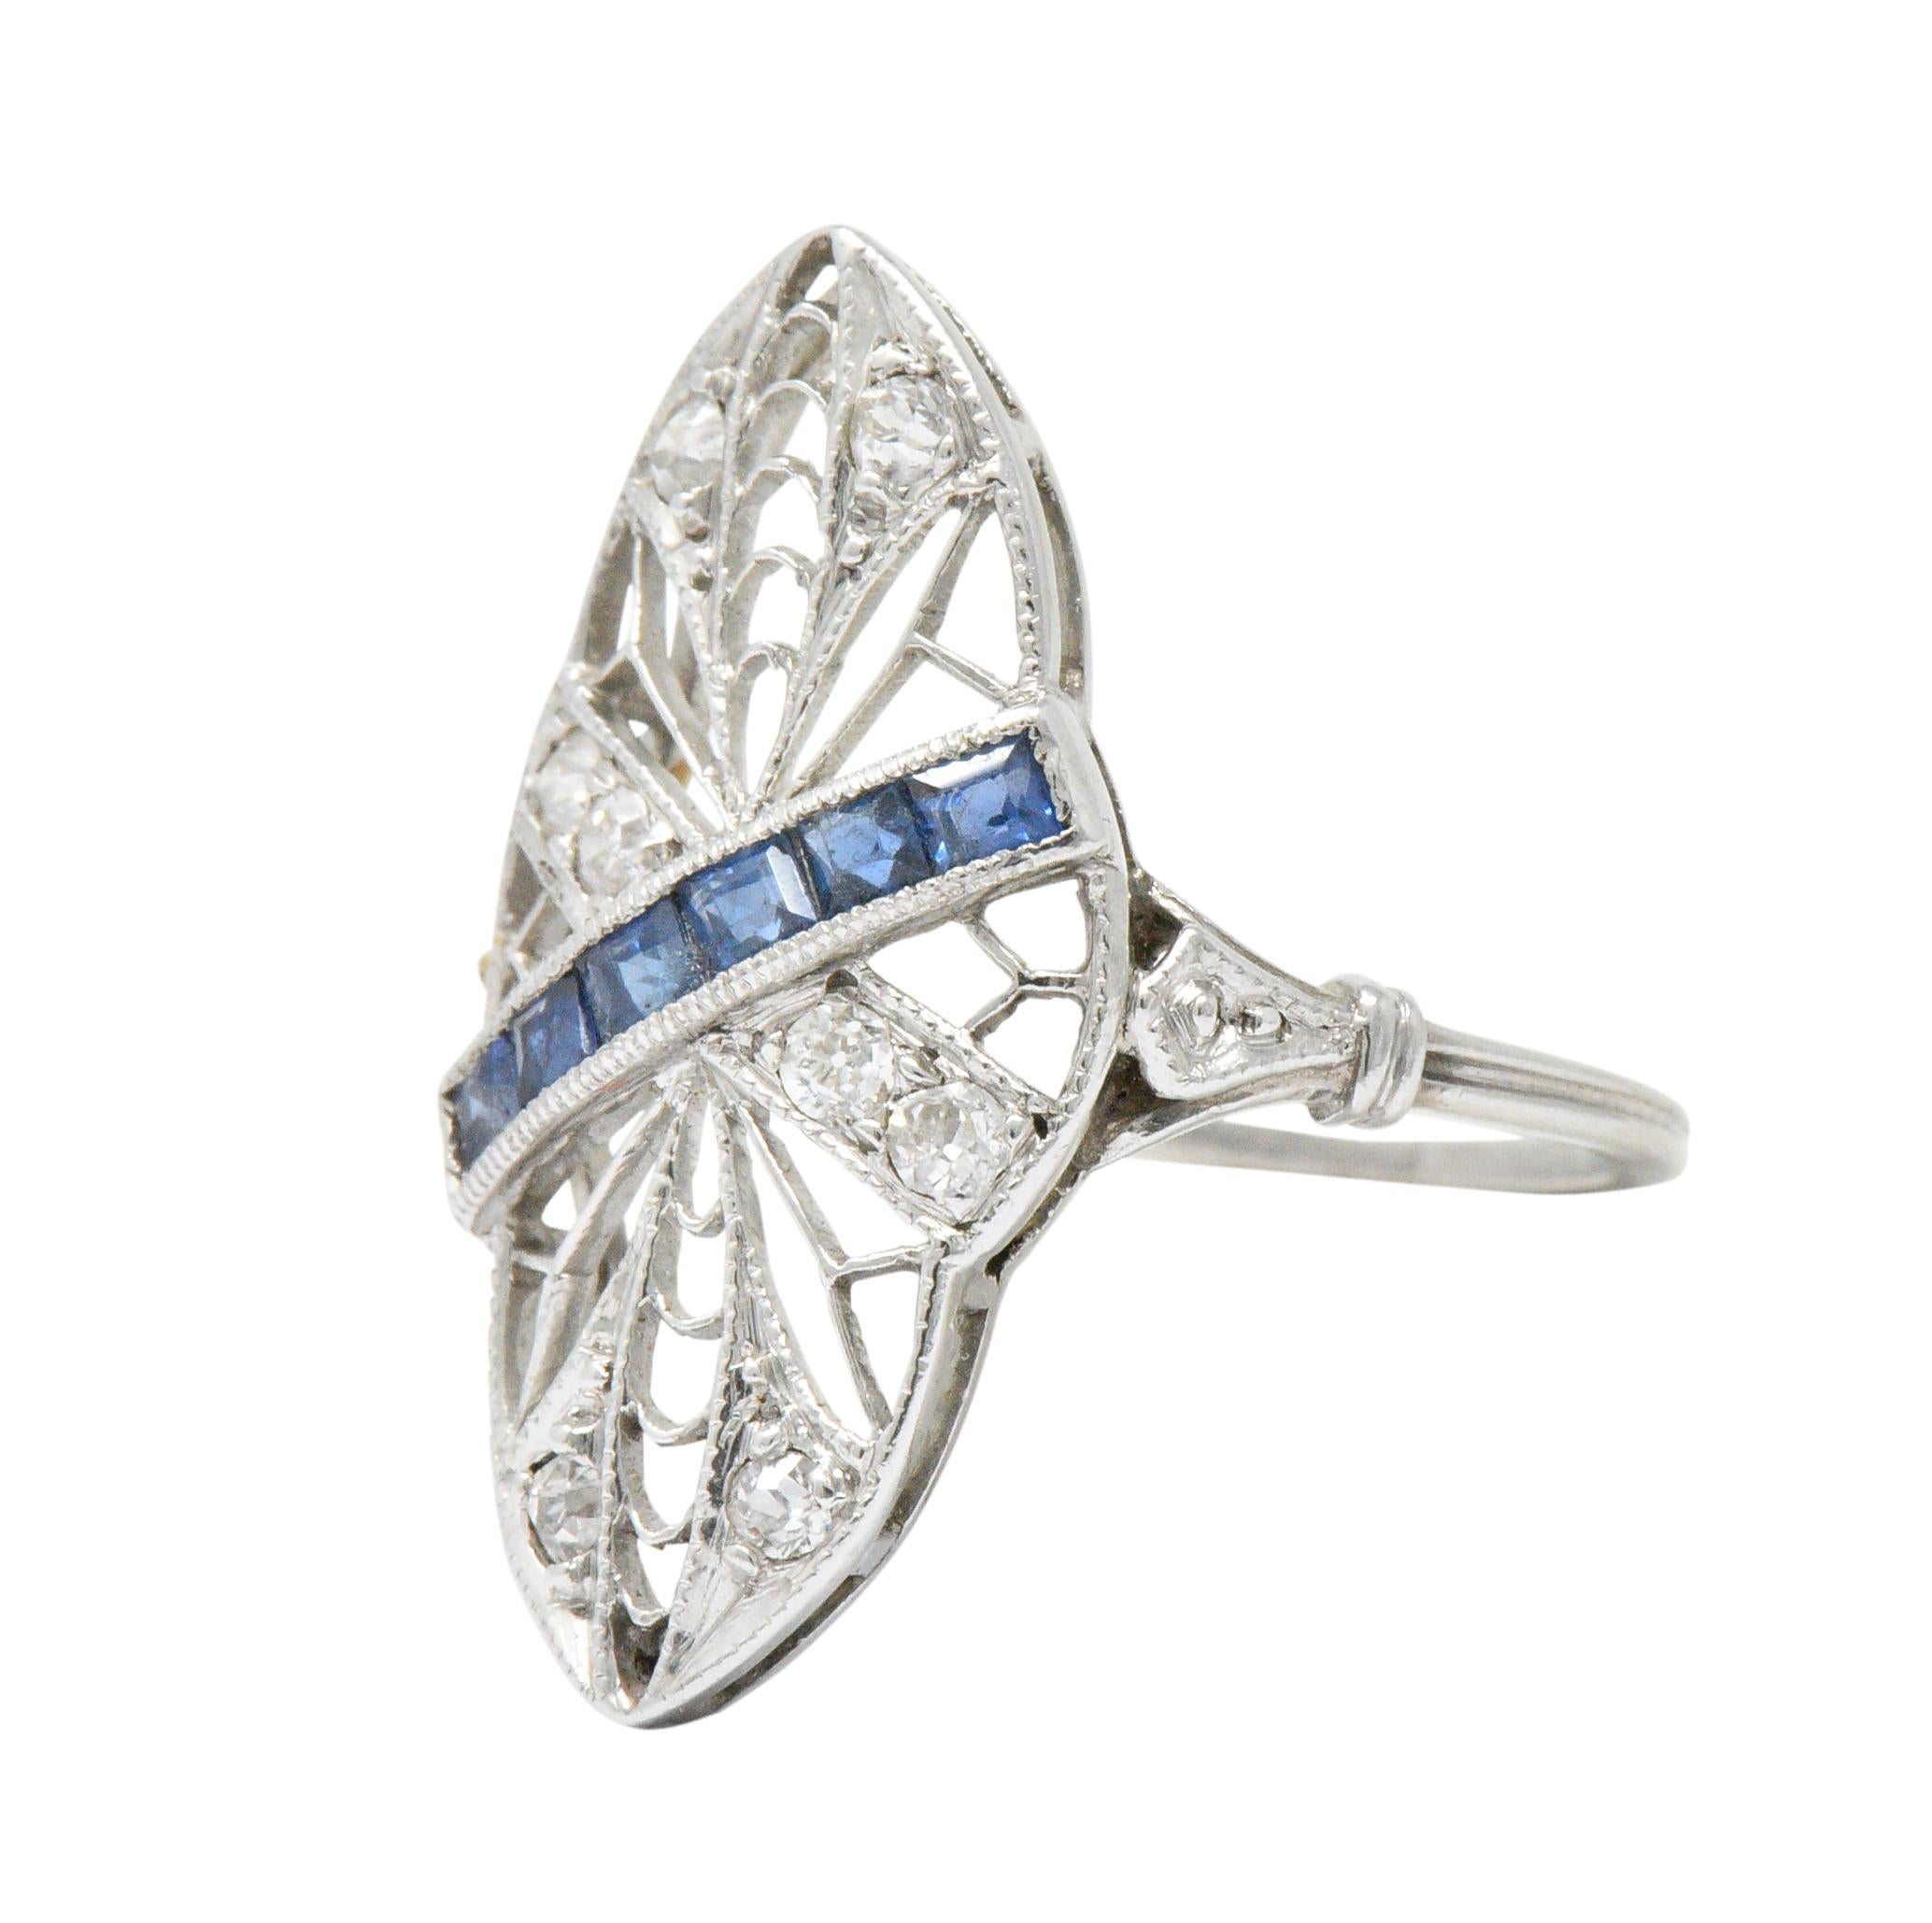 Dinner style ring with an intricately pierced navette form, milgrain detail, and a grooved shank

Bisected diagonally by channel set square calibré cut sapphire that weigh approximately 0.30 carat total; bright blue in color

Accented by Swiss cut